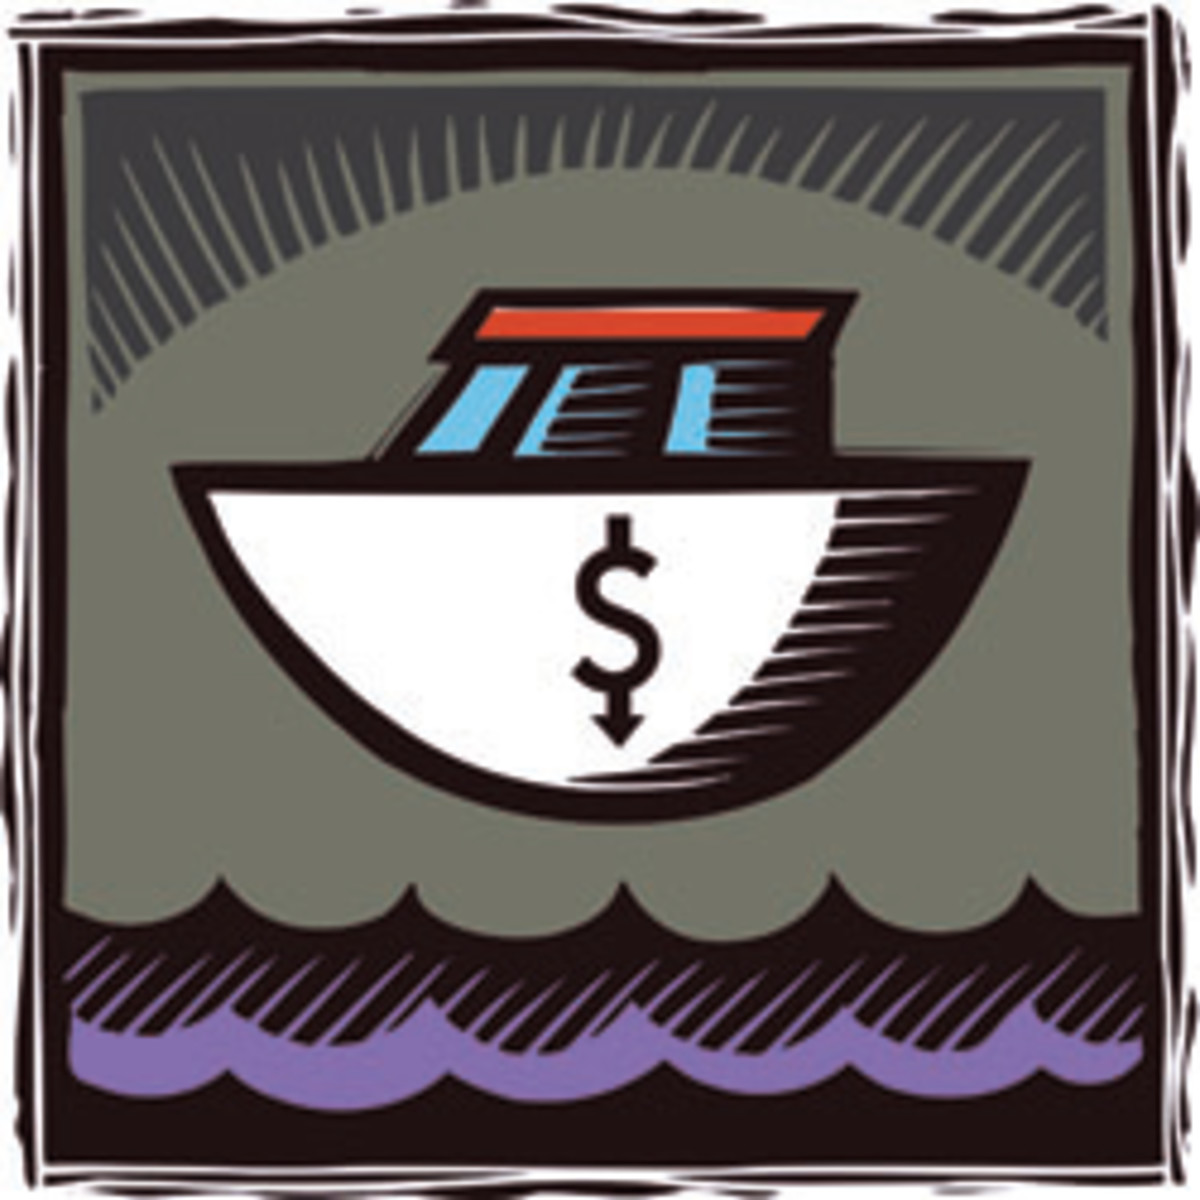 An image of a boat with a dollar sign on it